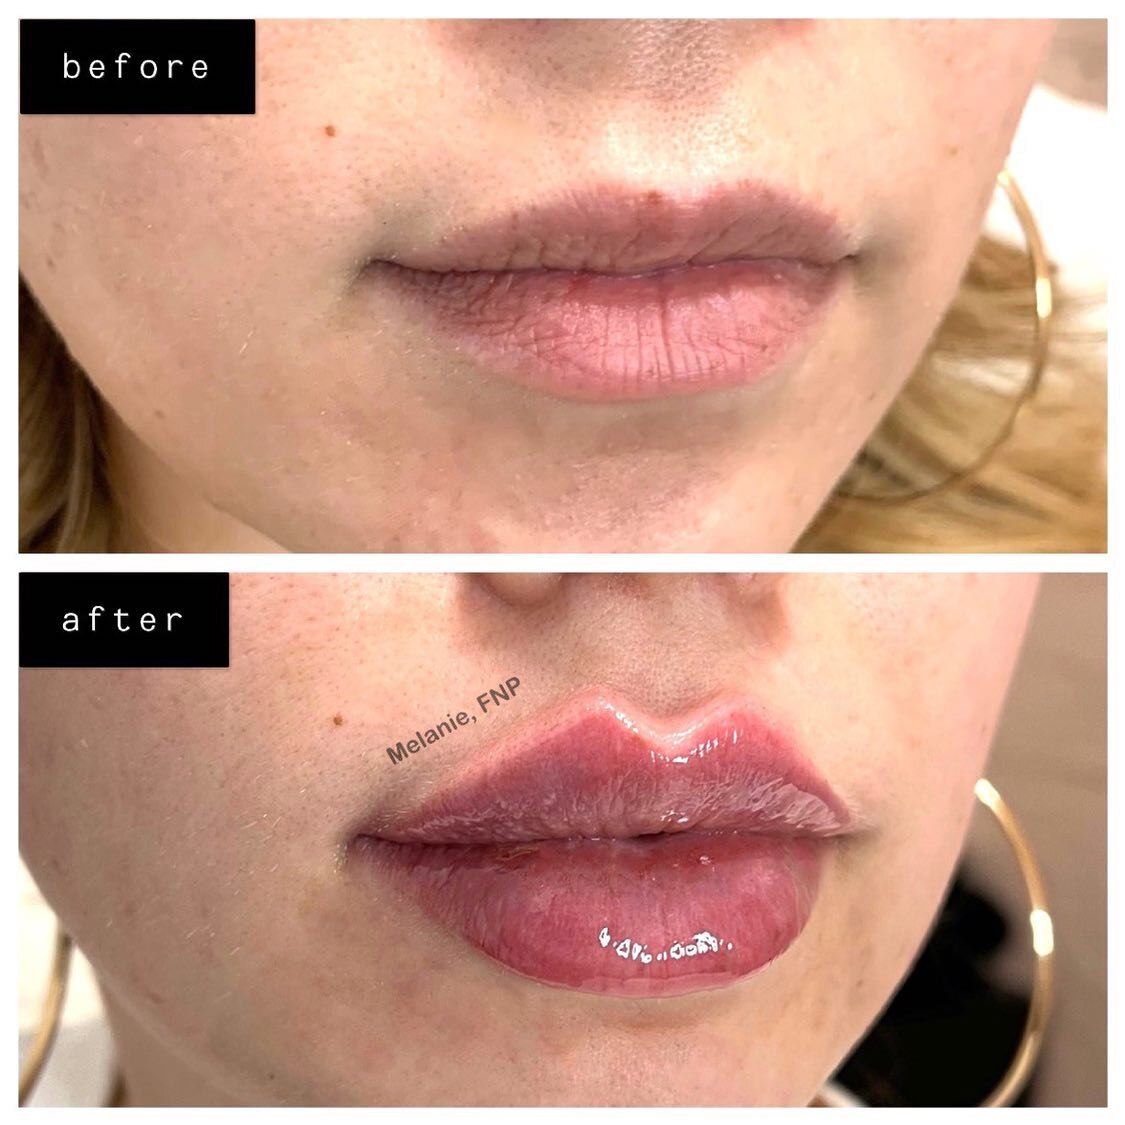 2 syringes done 5 months apart (final results photo was taken after 2nd syringe)💖
✅BORDER REFINEMENT
✅RUSSIAN LIPS
✅KEYHOLE POUT

What do you guys think of these results?😻⬇️

#russianlips#Juvederm#Restylane#Voluma#Botox#Dysport#Kybella#aesthetics#d